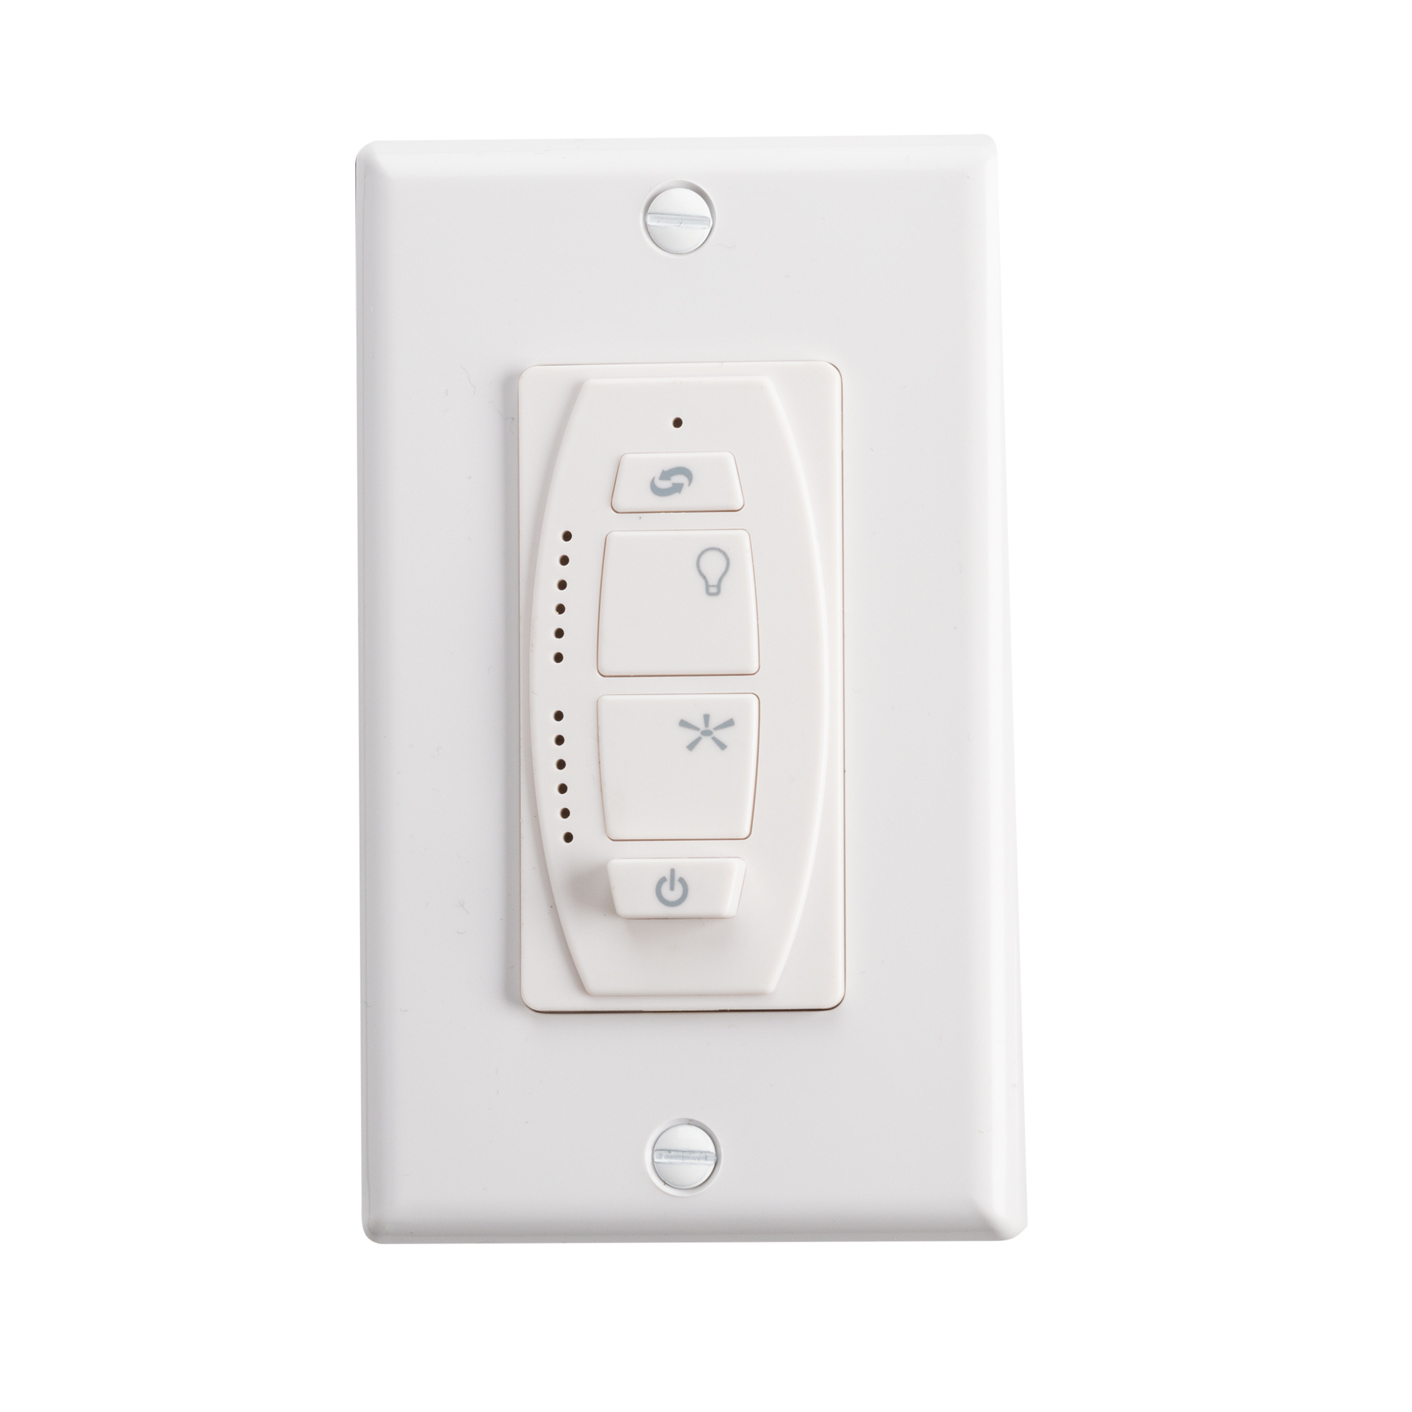 A 6 speed DC wall control  transmitter. Ivory finish.